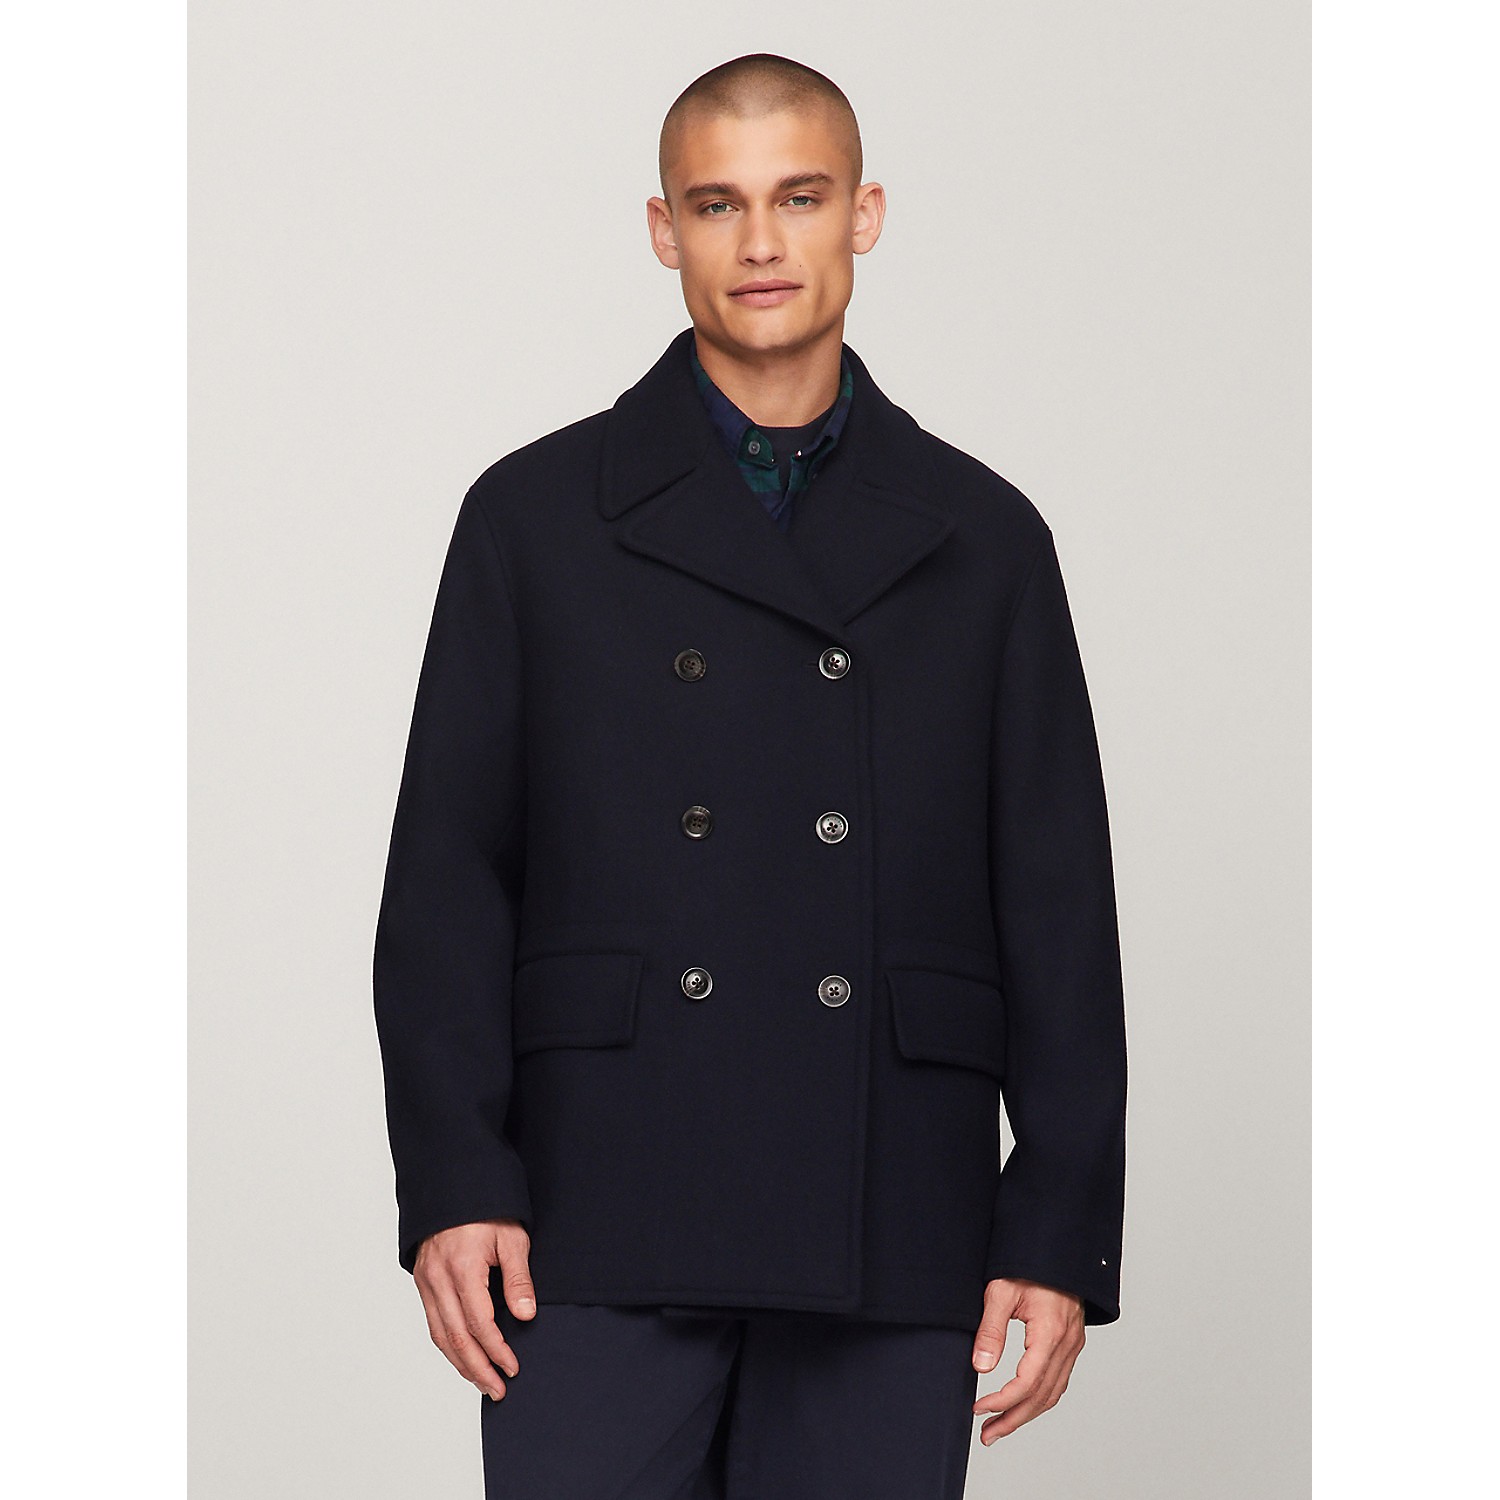 TOMMY HILFIGER Solid Wool Blend Peacoat